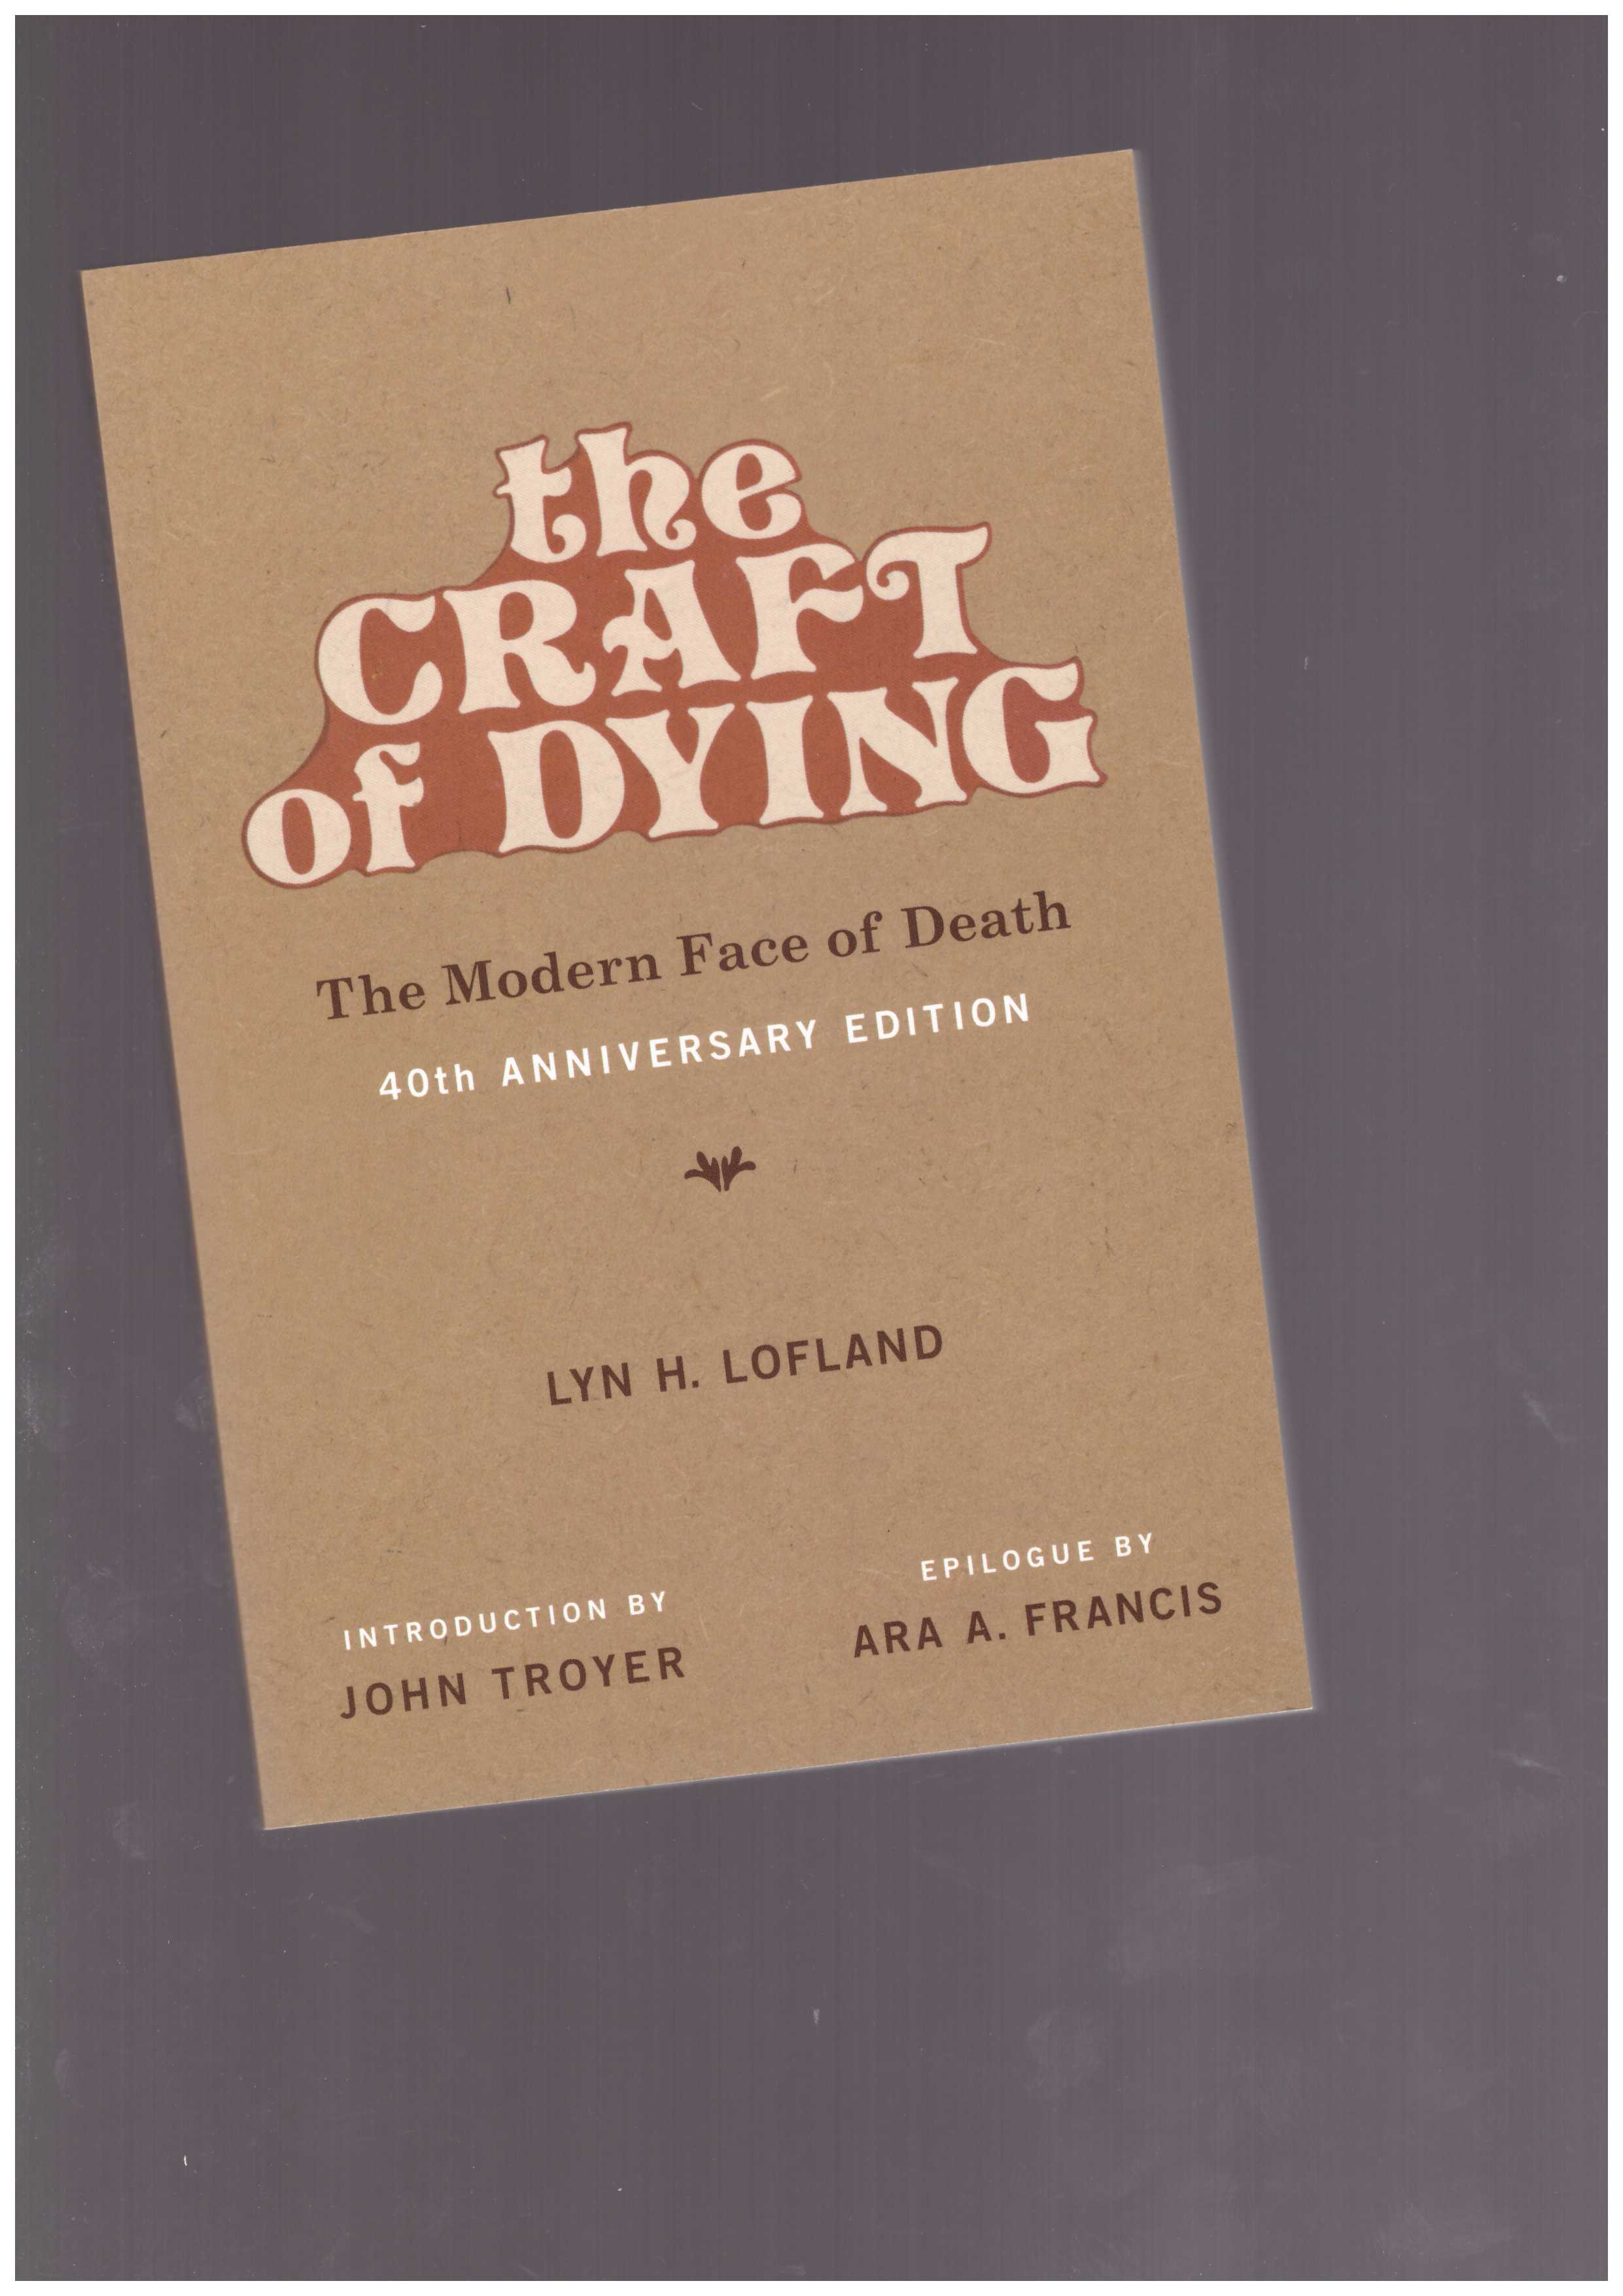 LOFLAND, Lyn H. - The Craft of Dying. The Modern Face of Death